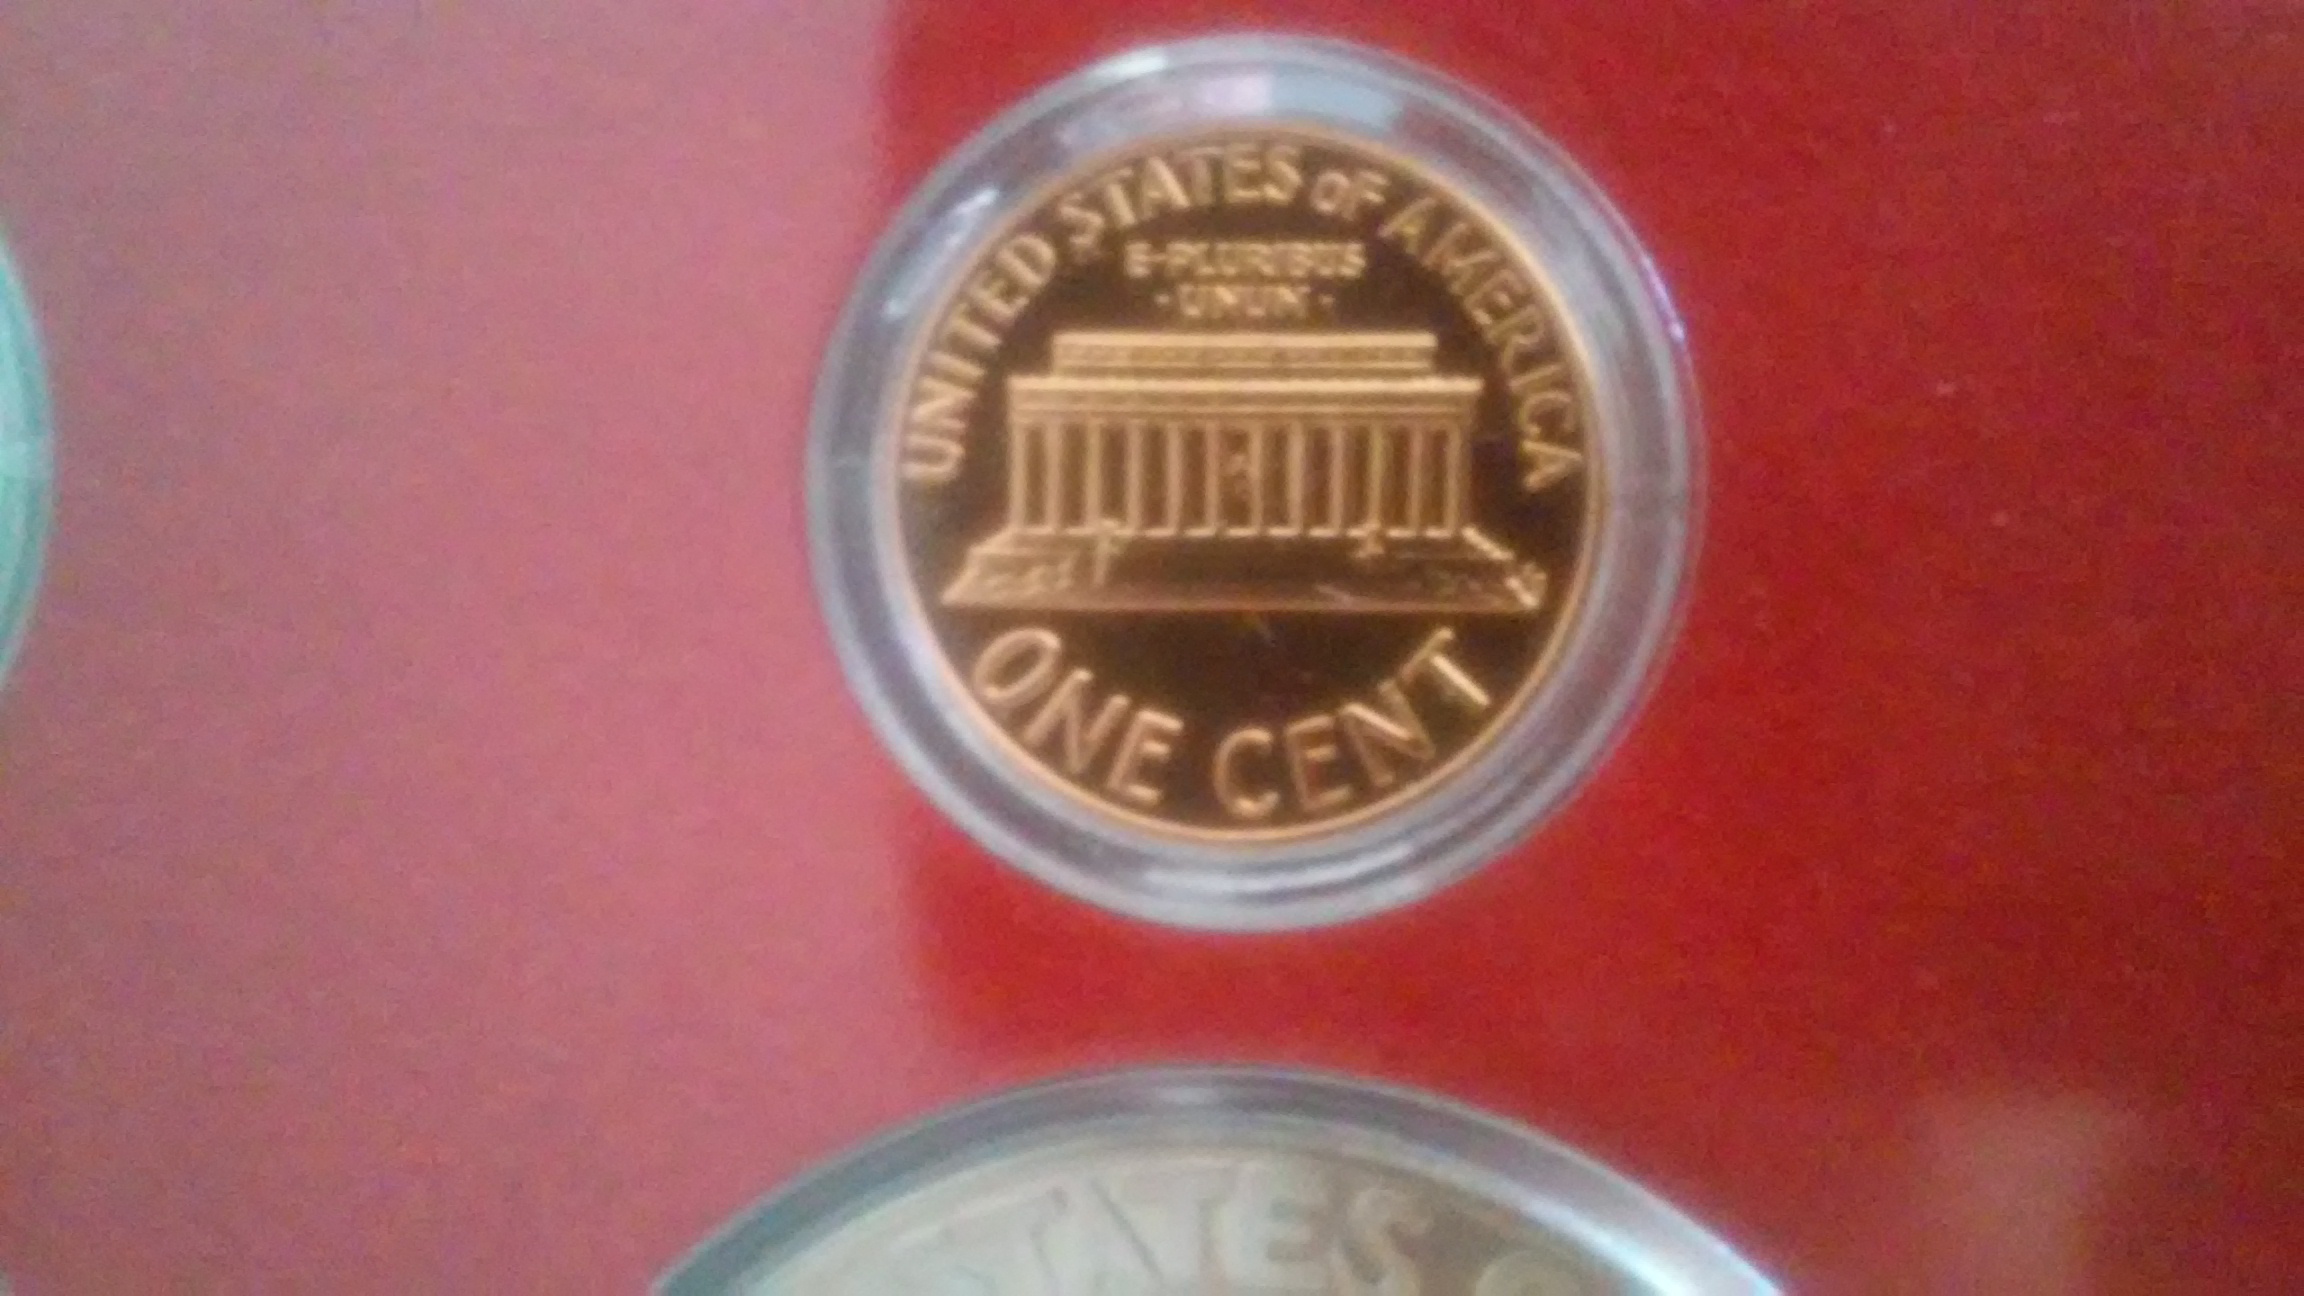 See The Bicentennial Half Dollar Value, How Much Other Kennedy Half Dollars Are Worth ...2304 x 1296